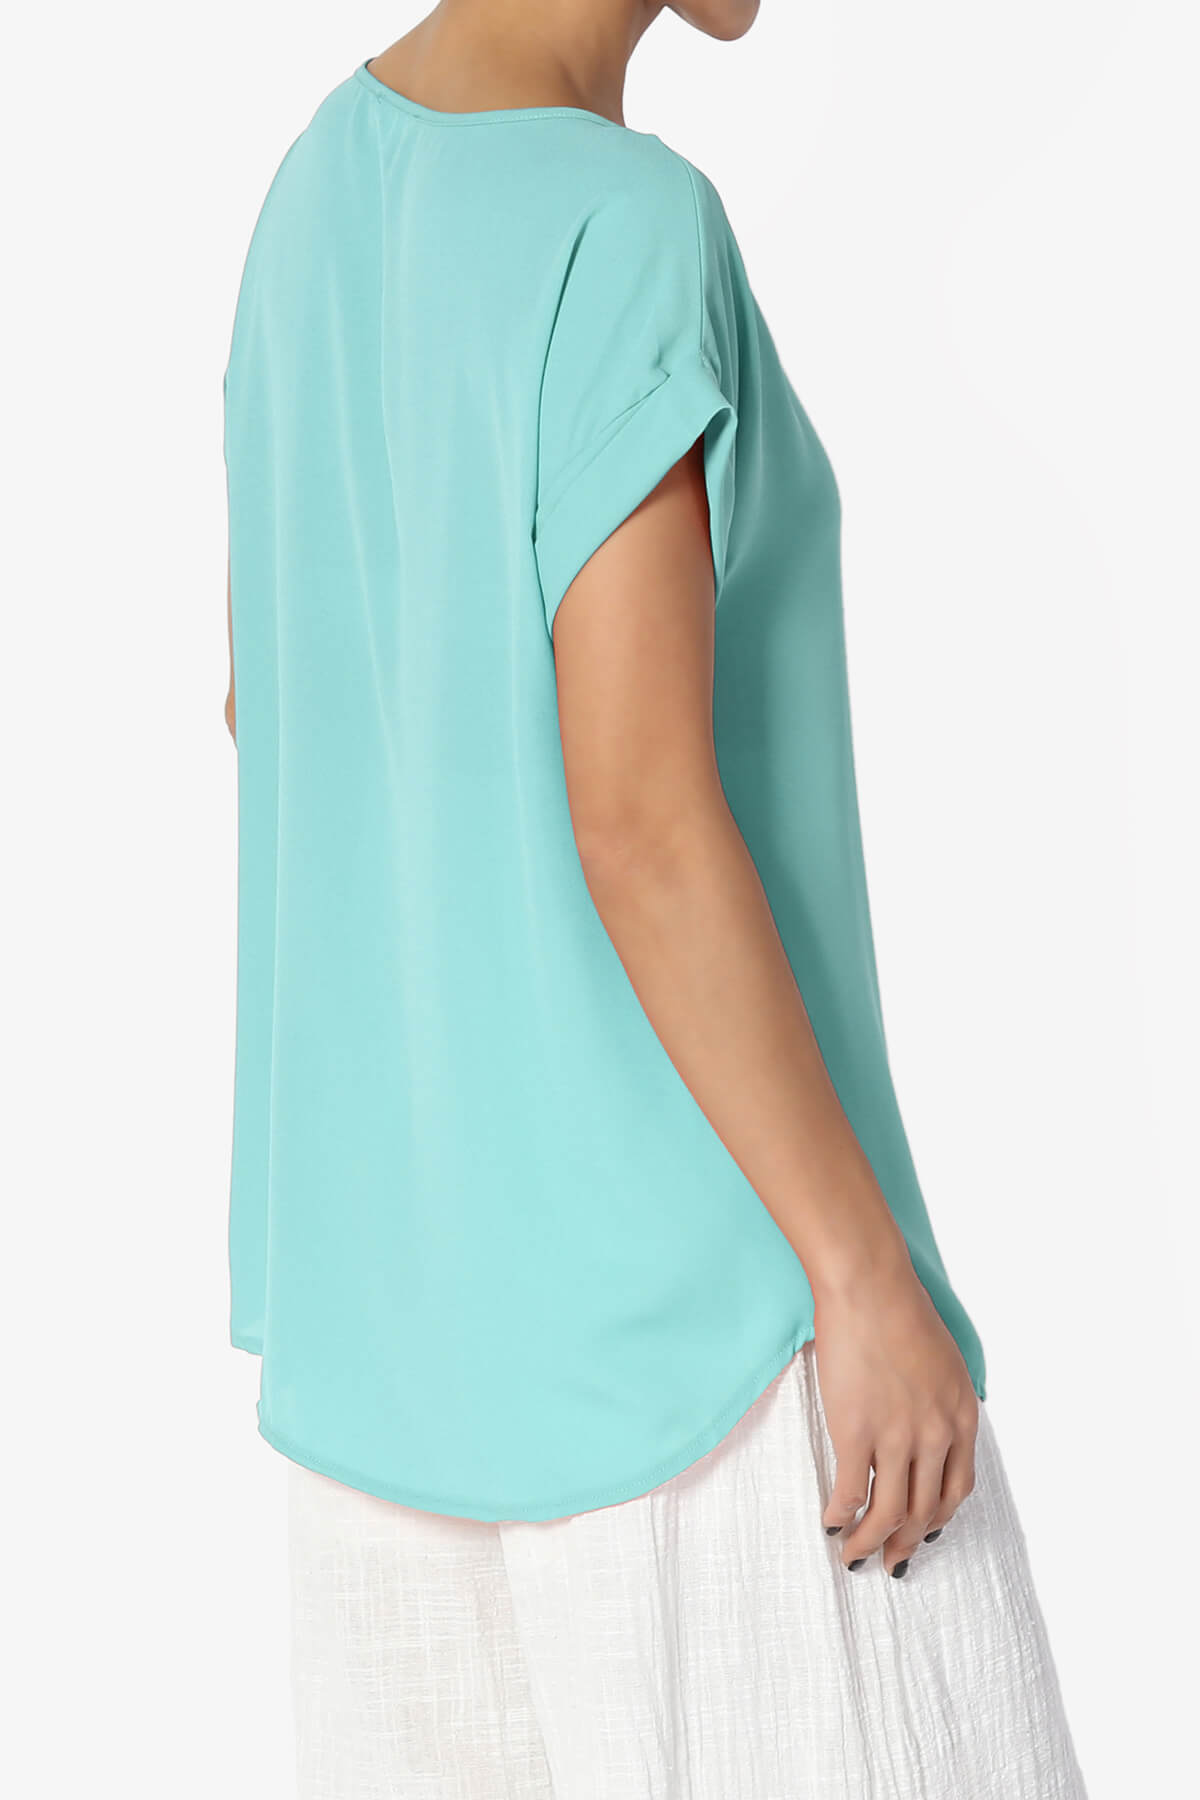 Load image into Gallery viewer, Juliette Boat Neck Chiffon Top ASH MINT_4
